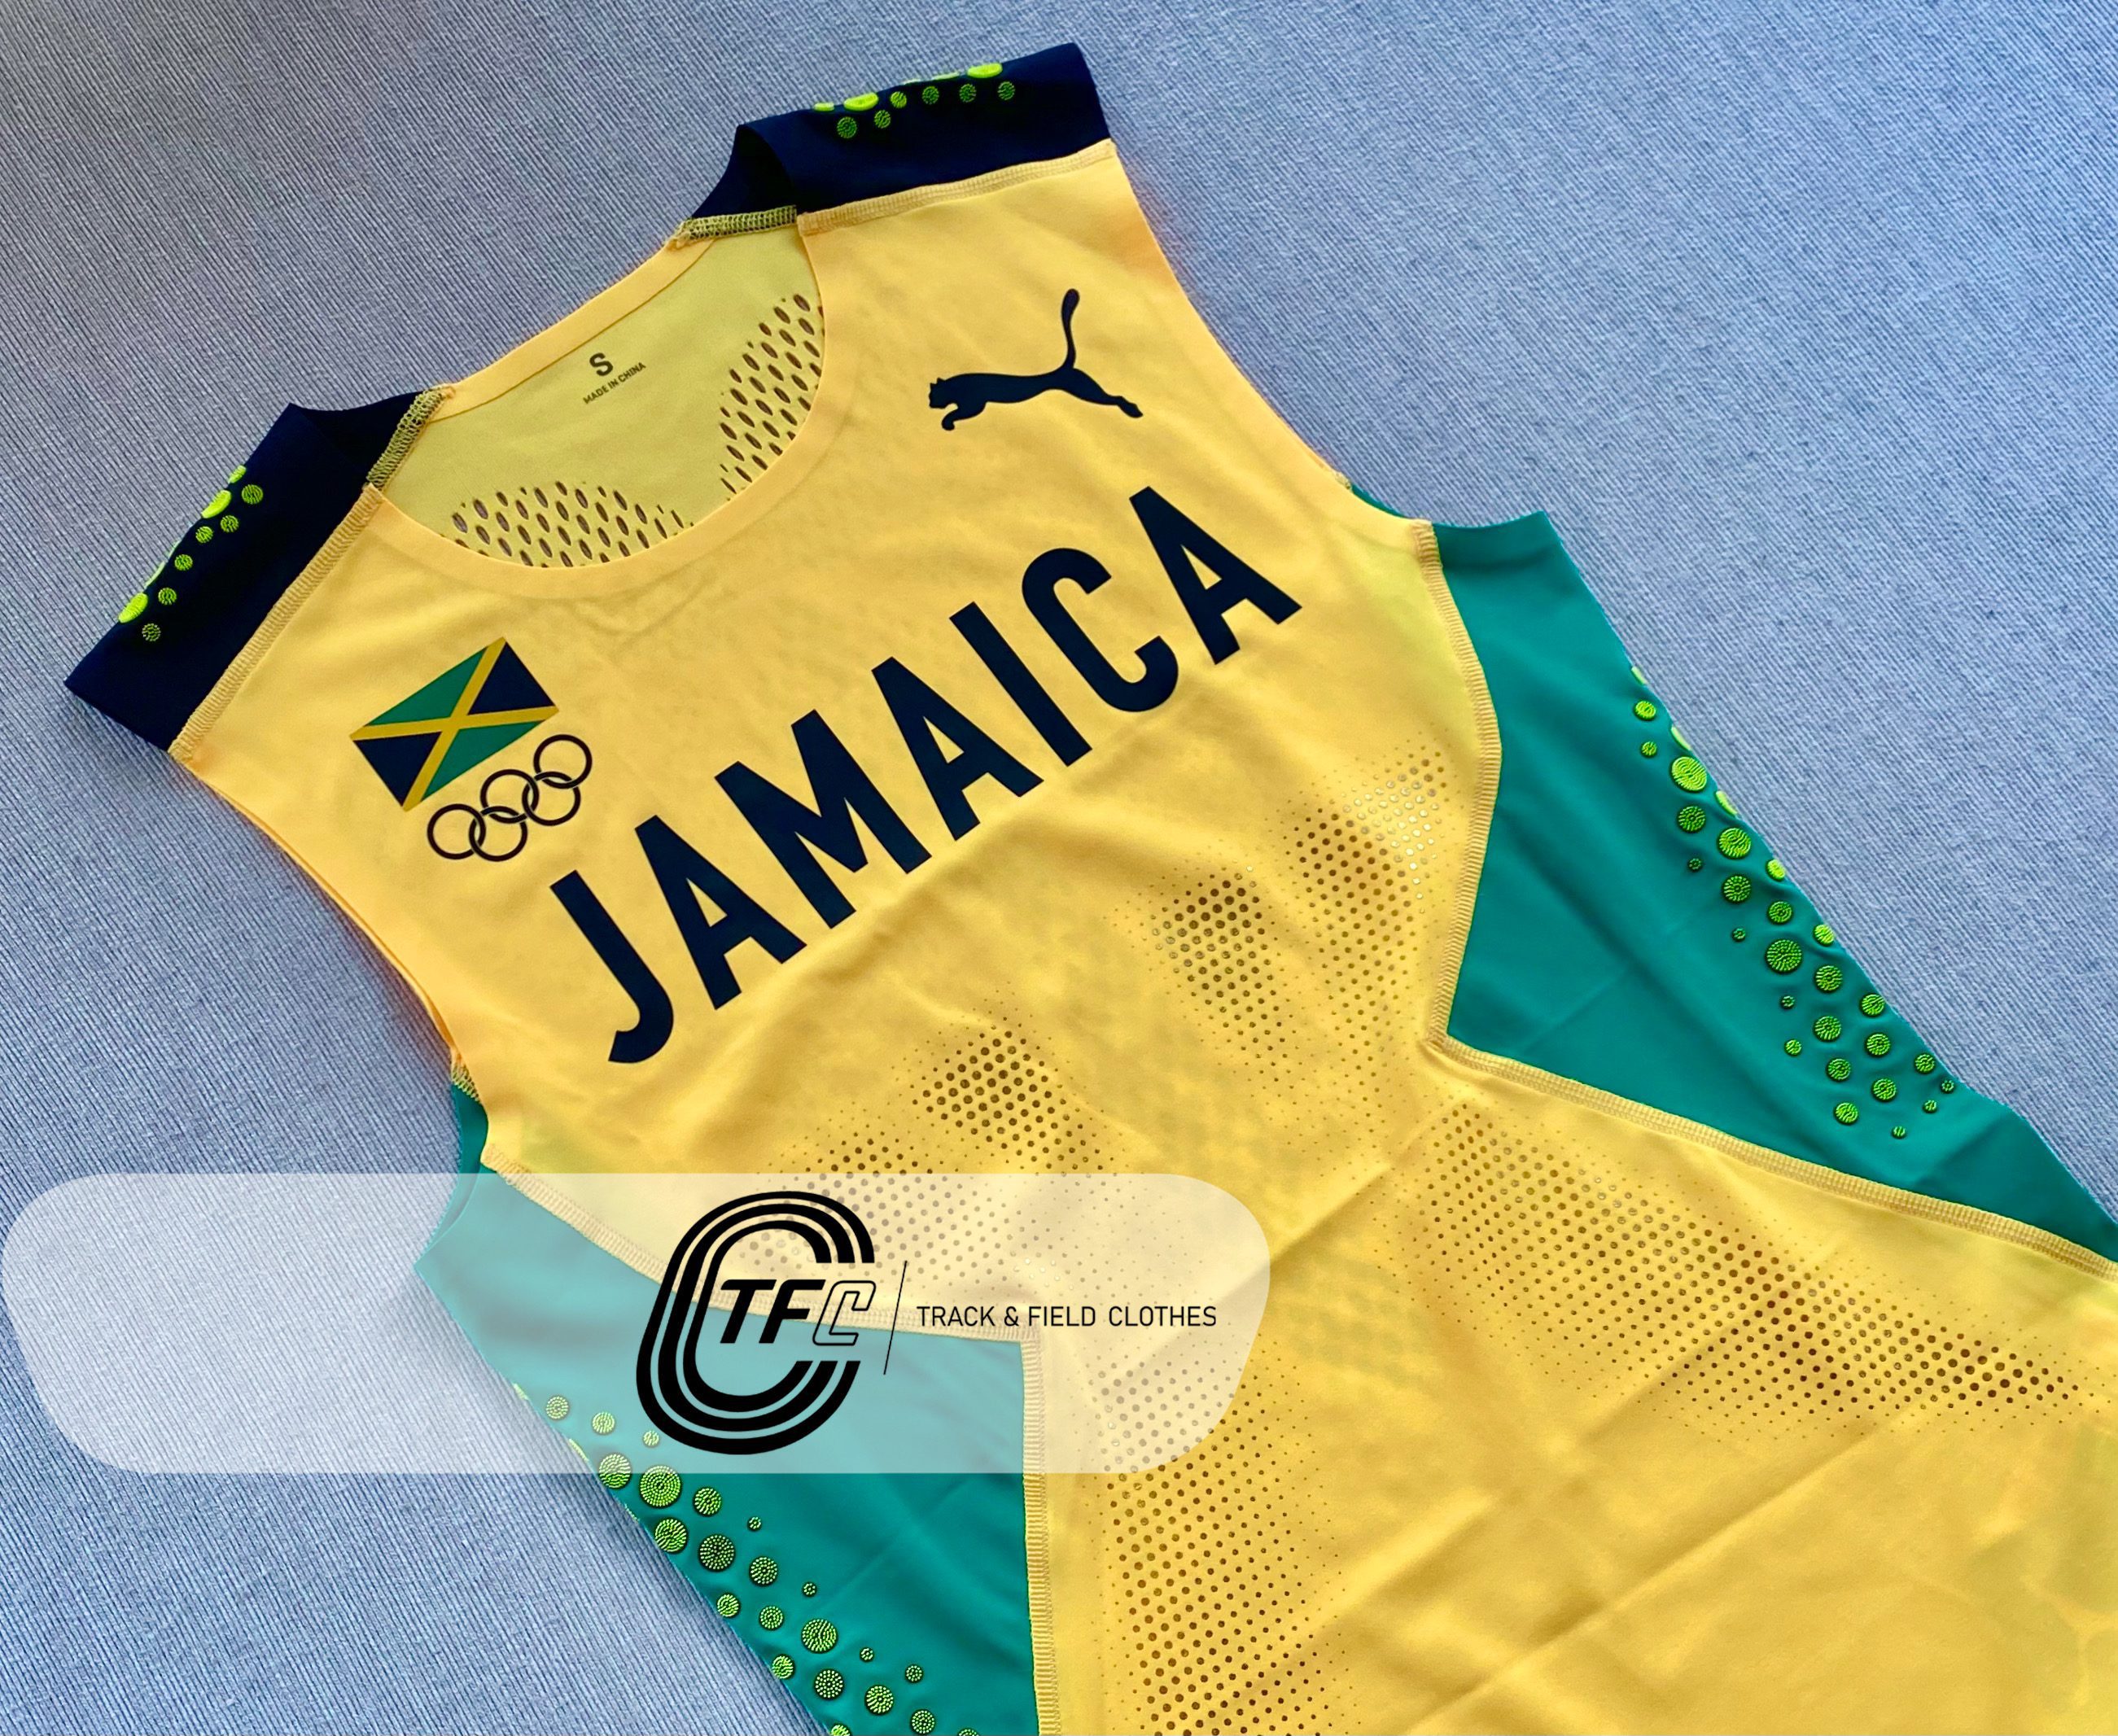 Puma 2021 Jamaica Olympic Team Muscle Singlet Trackandfieldclothes